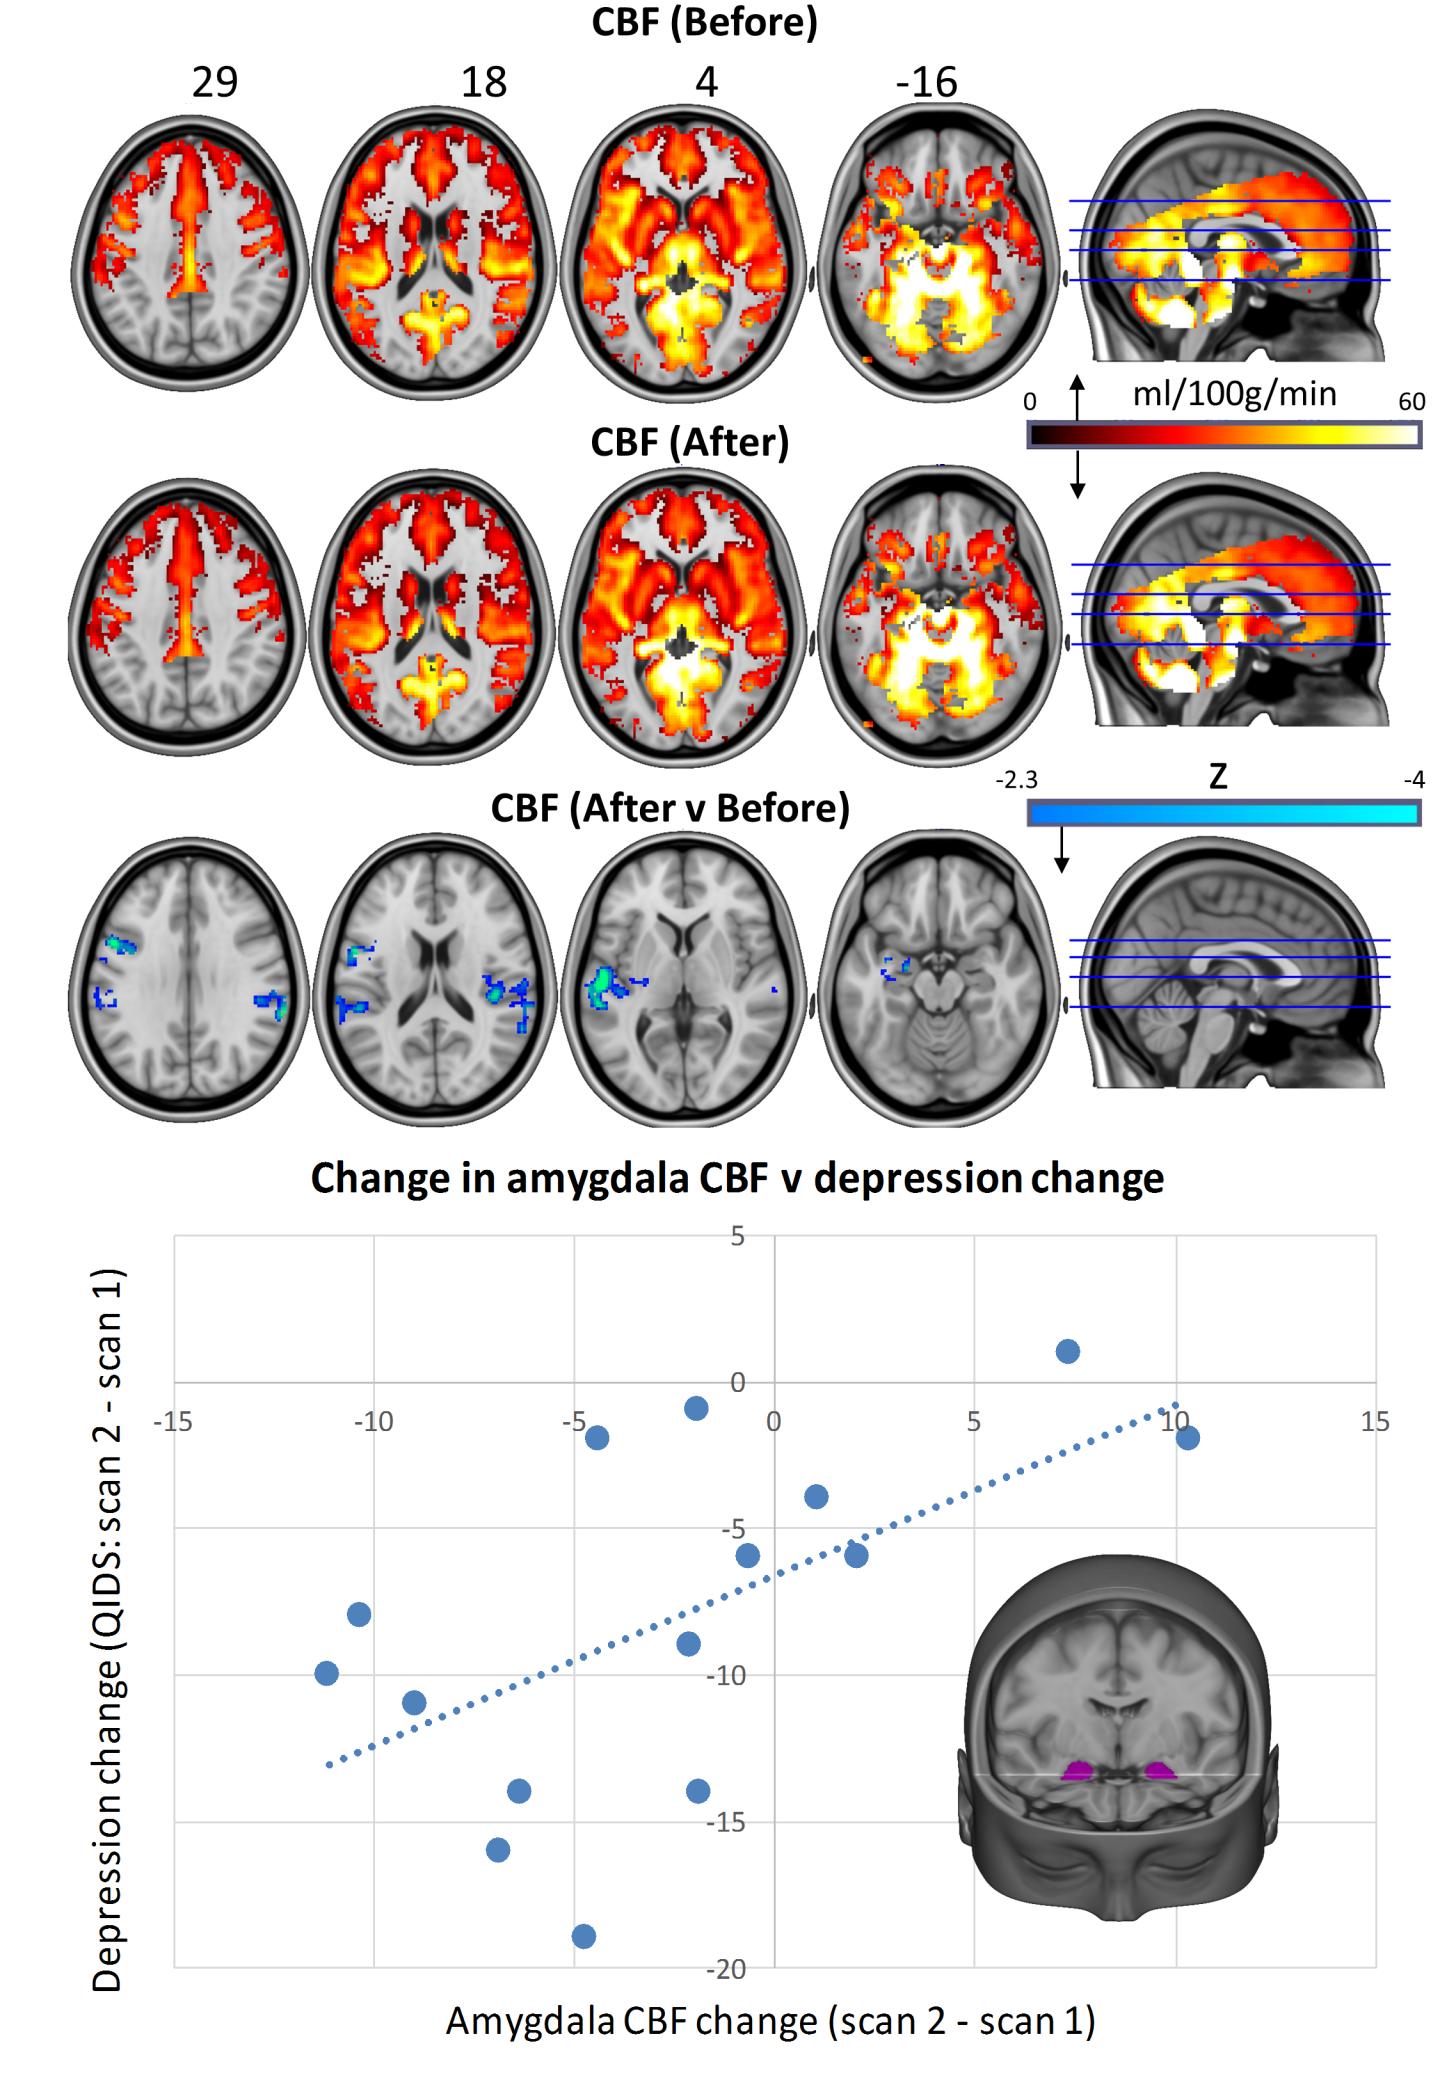 Whole-brain cerebral blood flow maps for baseline versus one-day post-treatment, plus the difference map (cluster-corrected, p < 0.05, n = 16). Correlation chart shows post-treatment changes in bilateral amygdala cerebral blood flow versus changes in depressive symptoms (r = 0.59, p = 0.01). One patient failed to complete the scan 2 QIDS-SR16 rating, reducing the sample size to n = 15 for the correlation analysis. In all of the images, the left of the brain is shown on the left. Carhart Harris et al., Scientific Reports 2017